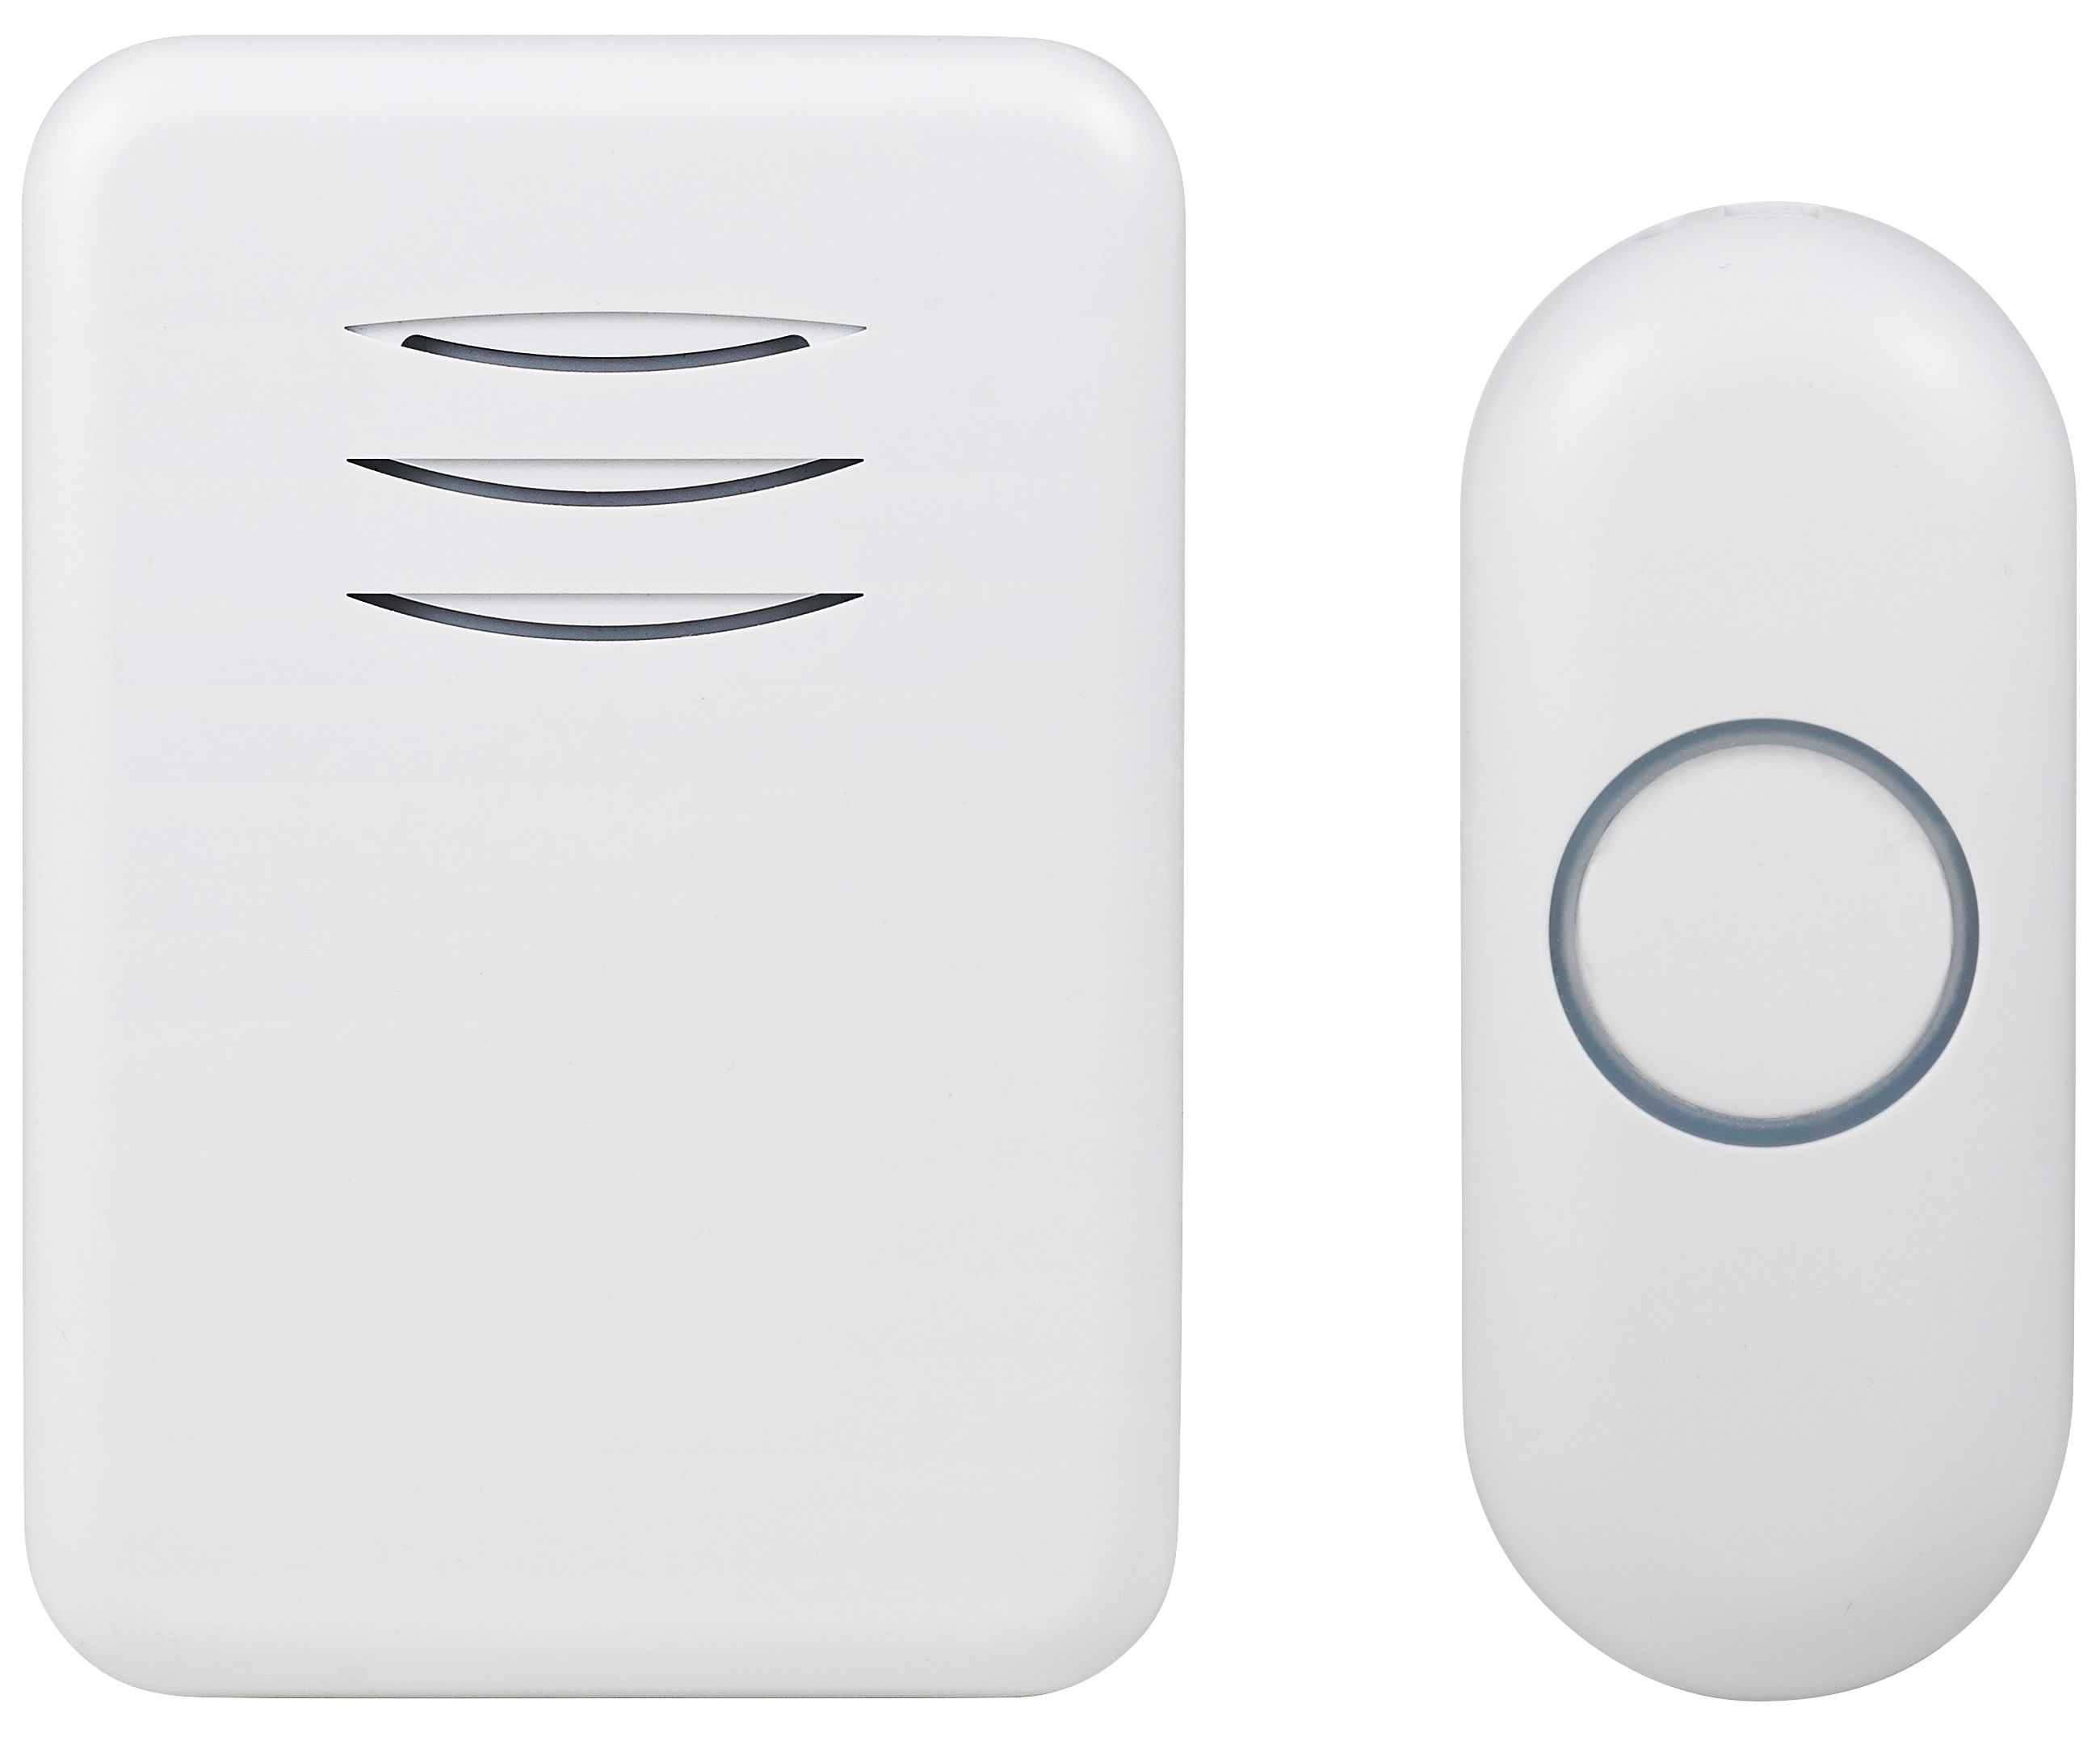 Image of Byron DBY-22312UK 150m Wireless Doorbell with Plug In Chime